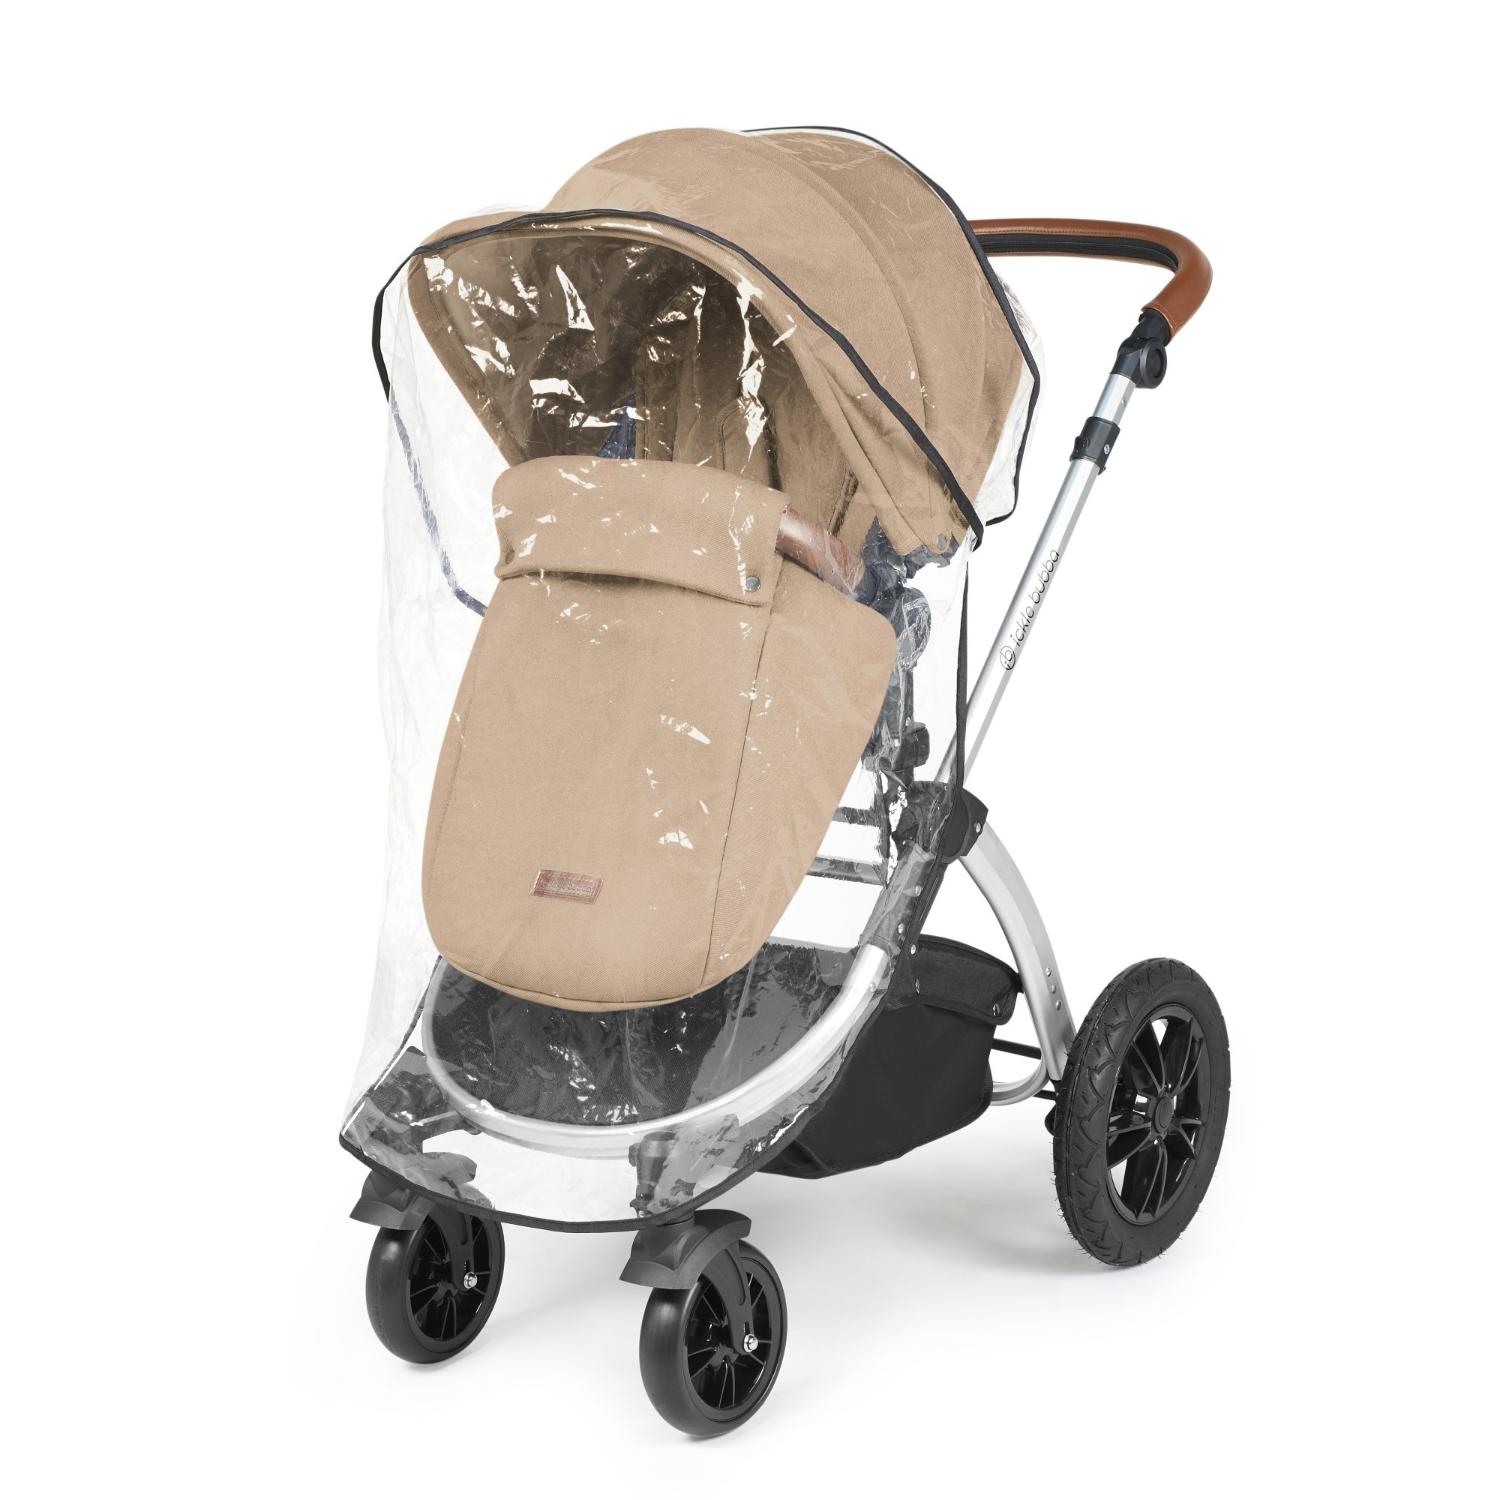 Rain cover placed on an Ickle Bubba Stomp Luxe Pushchair in Desert beige colour with silver chassis and tan handle